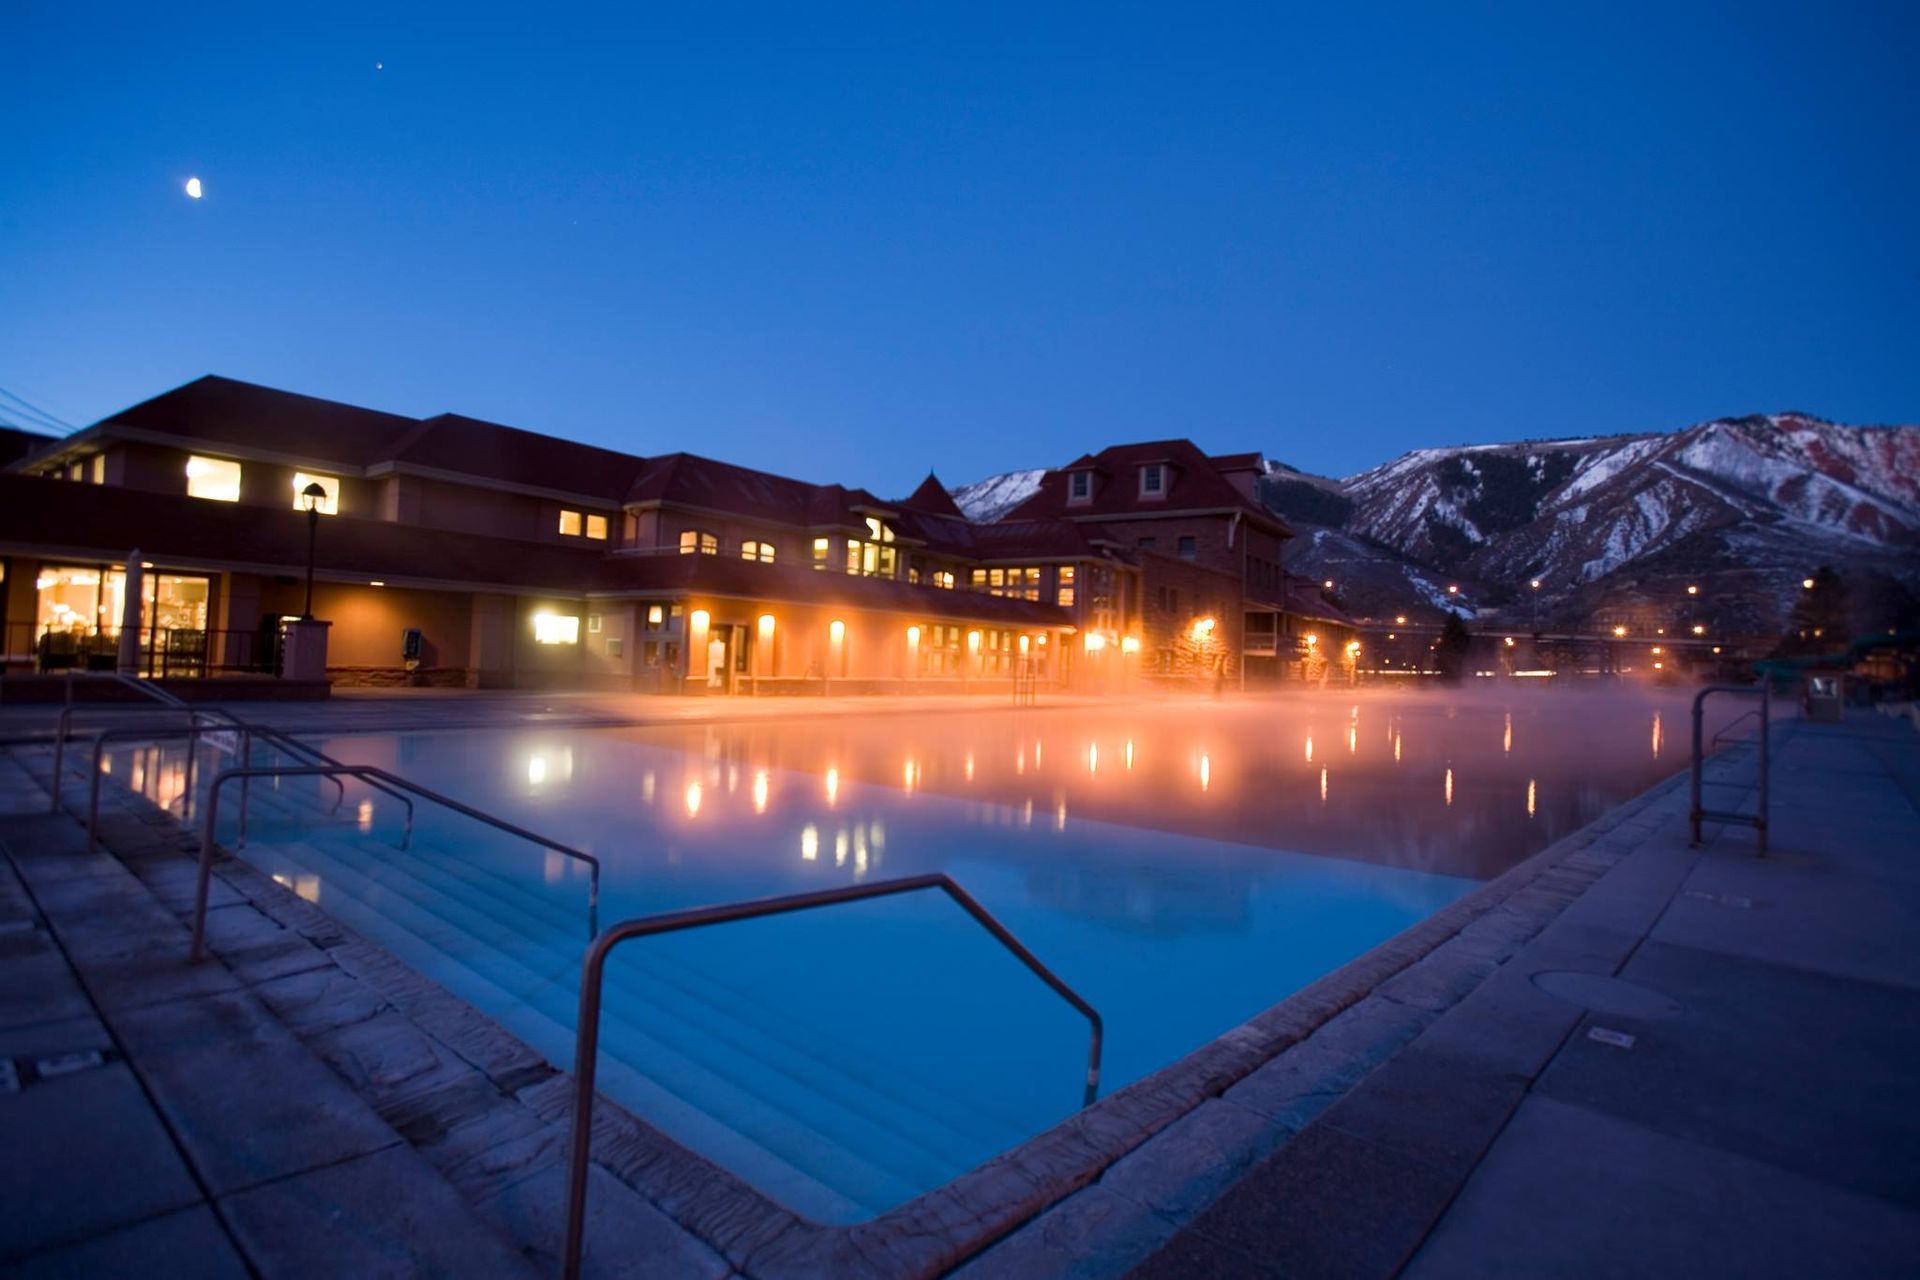 World's Largest Mineral Hot Spring: world record in Glenwood Springs, Colorado